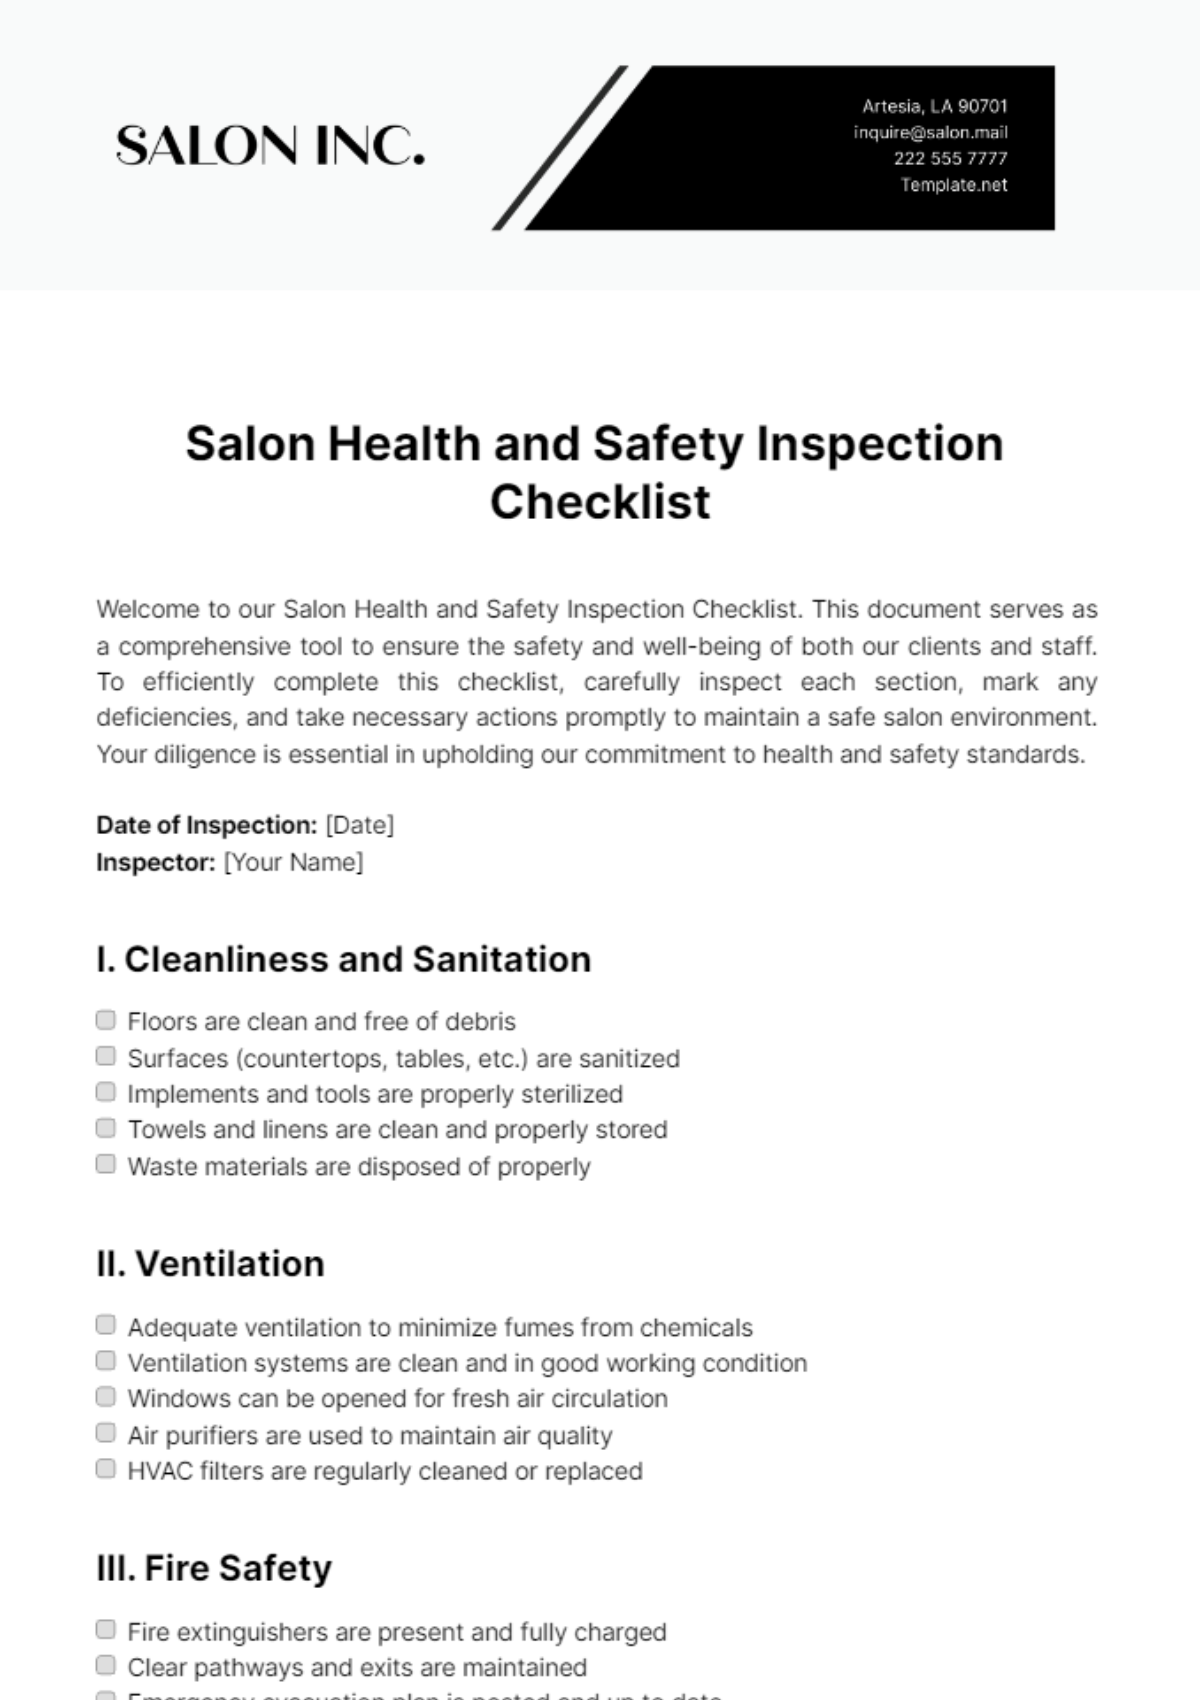 Salon Health and Safety Inspection Checklist Template